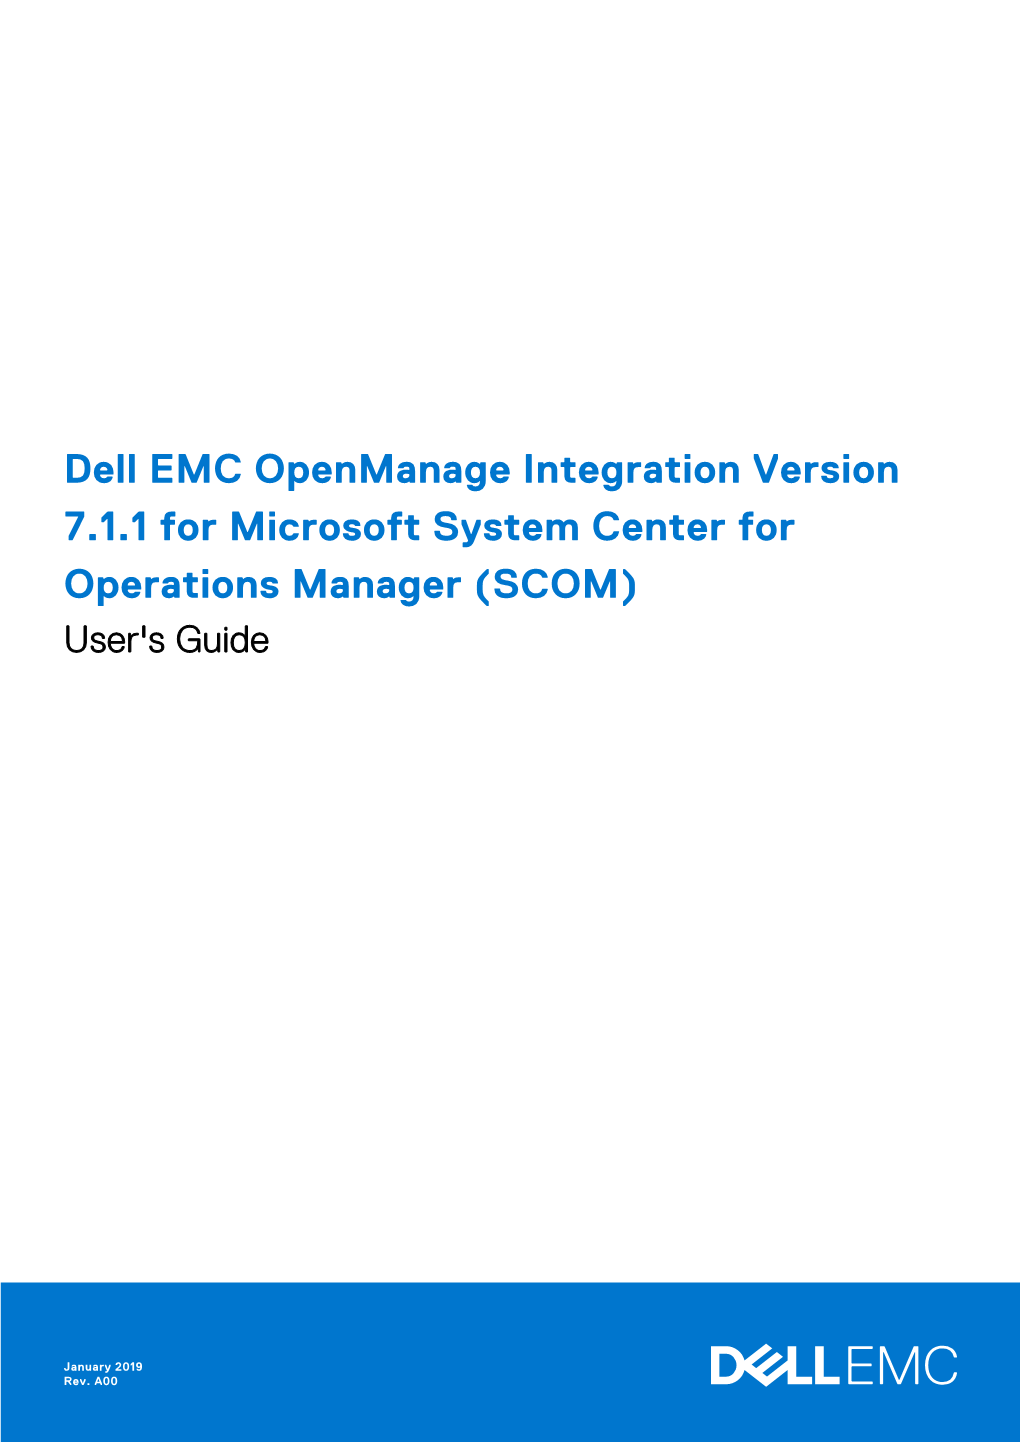 Dell EMC Openmanage Integration Version 7.1.1 for Microsoft System Center for Operations Manager (SCOM) User's Guide